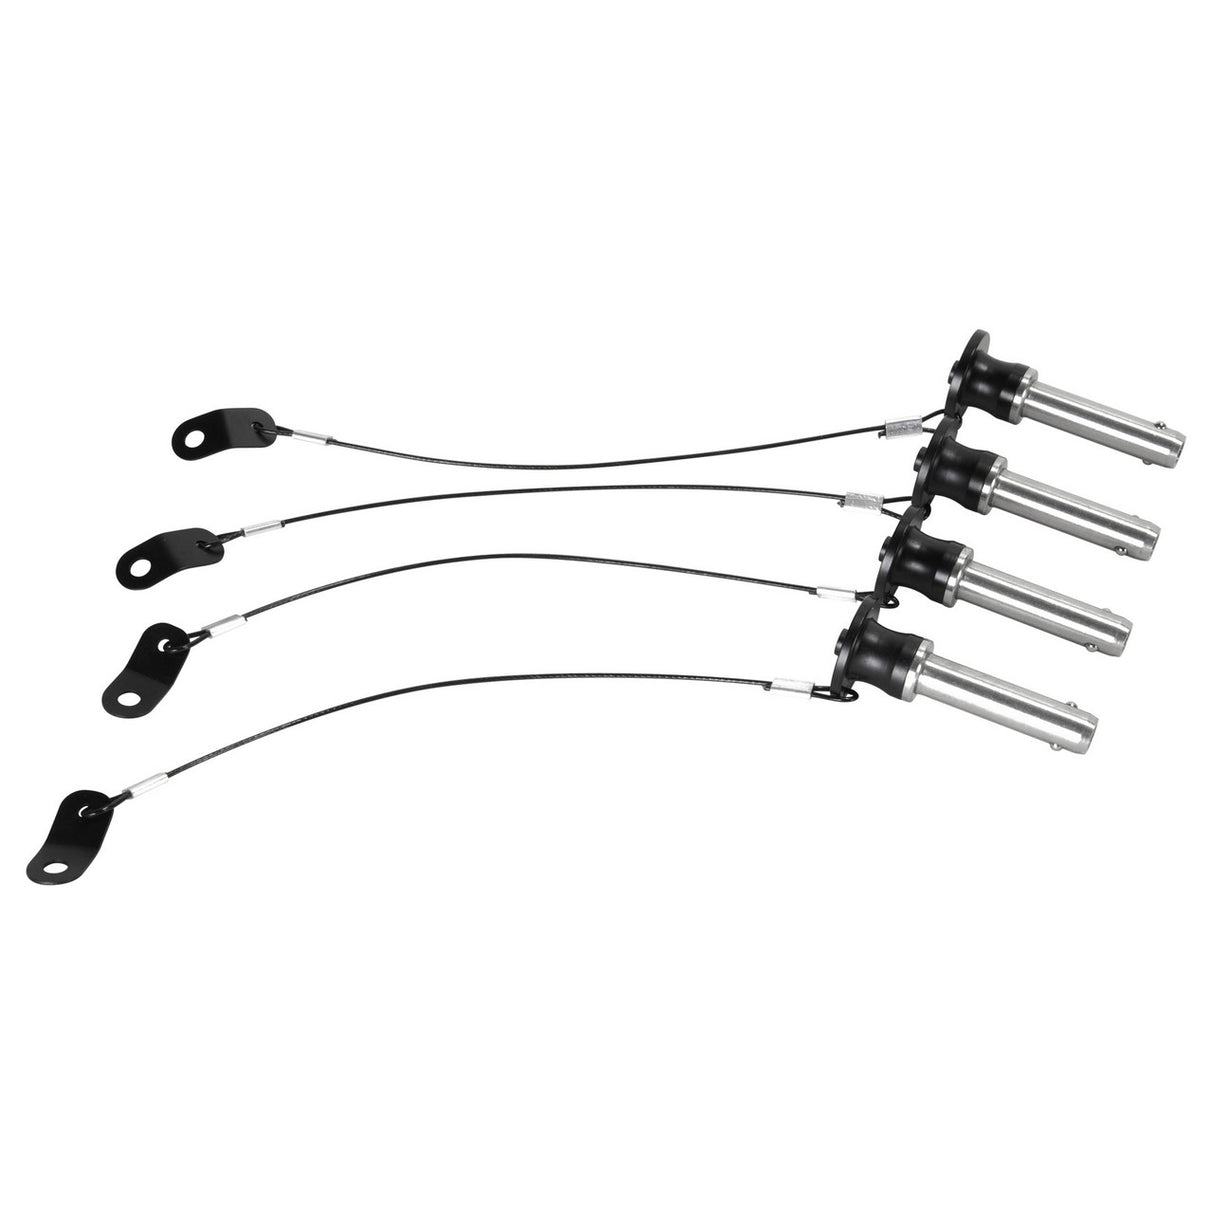 RCF AC-4PIN-HDL20-R | 4 Long Rear Pins for HDL10 and HDL20